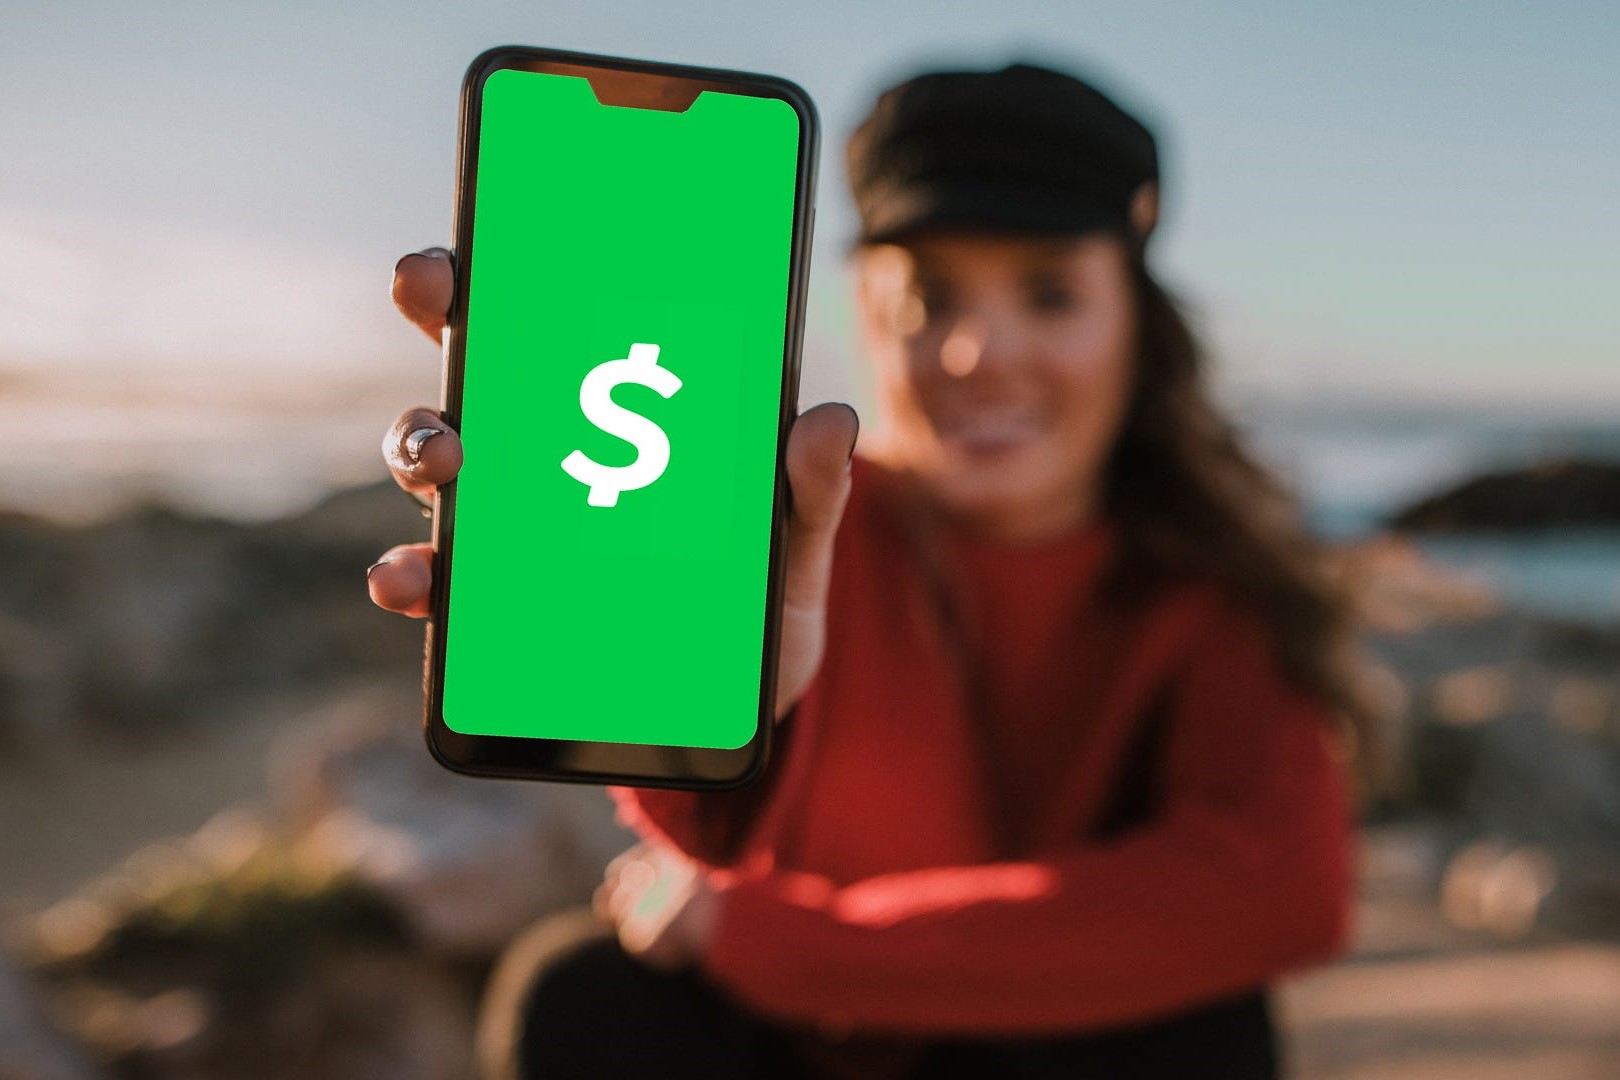 Discover The Meaning Behind Someone Wanting To Bless Your Cash App!